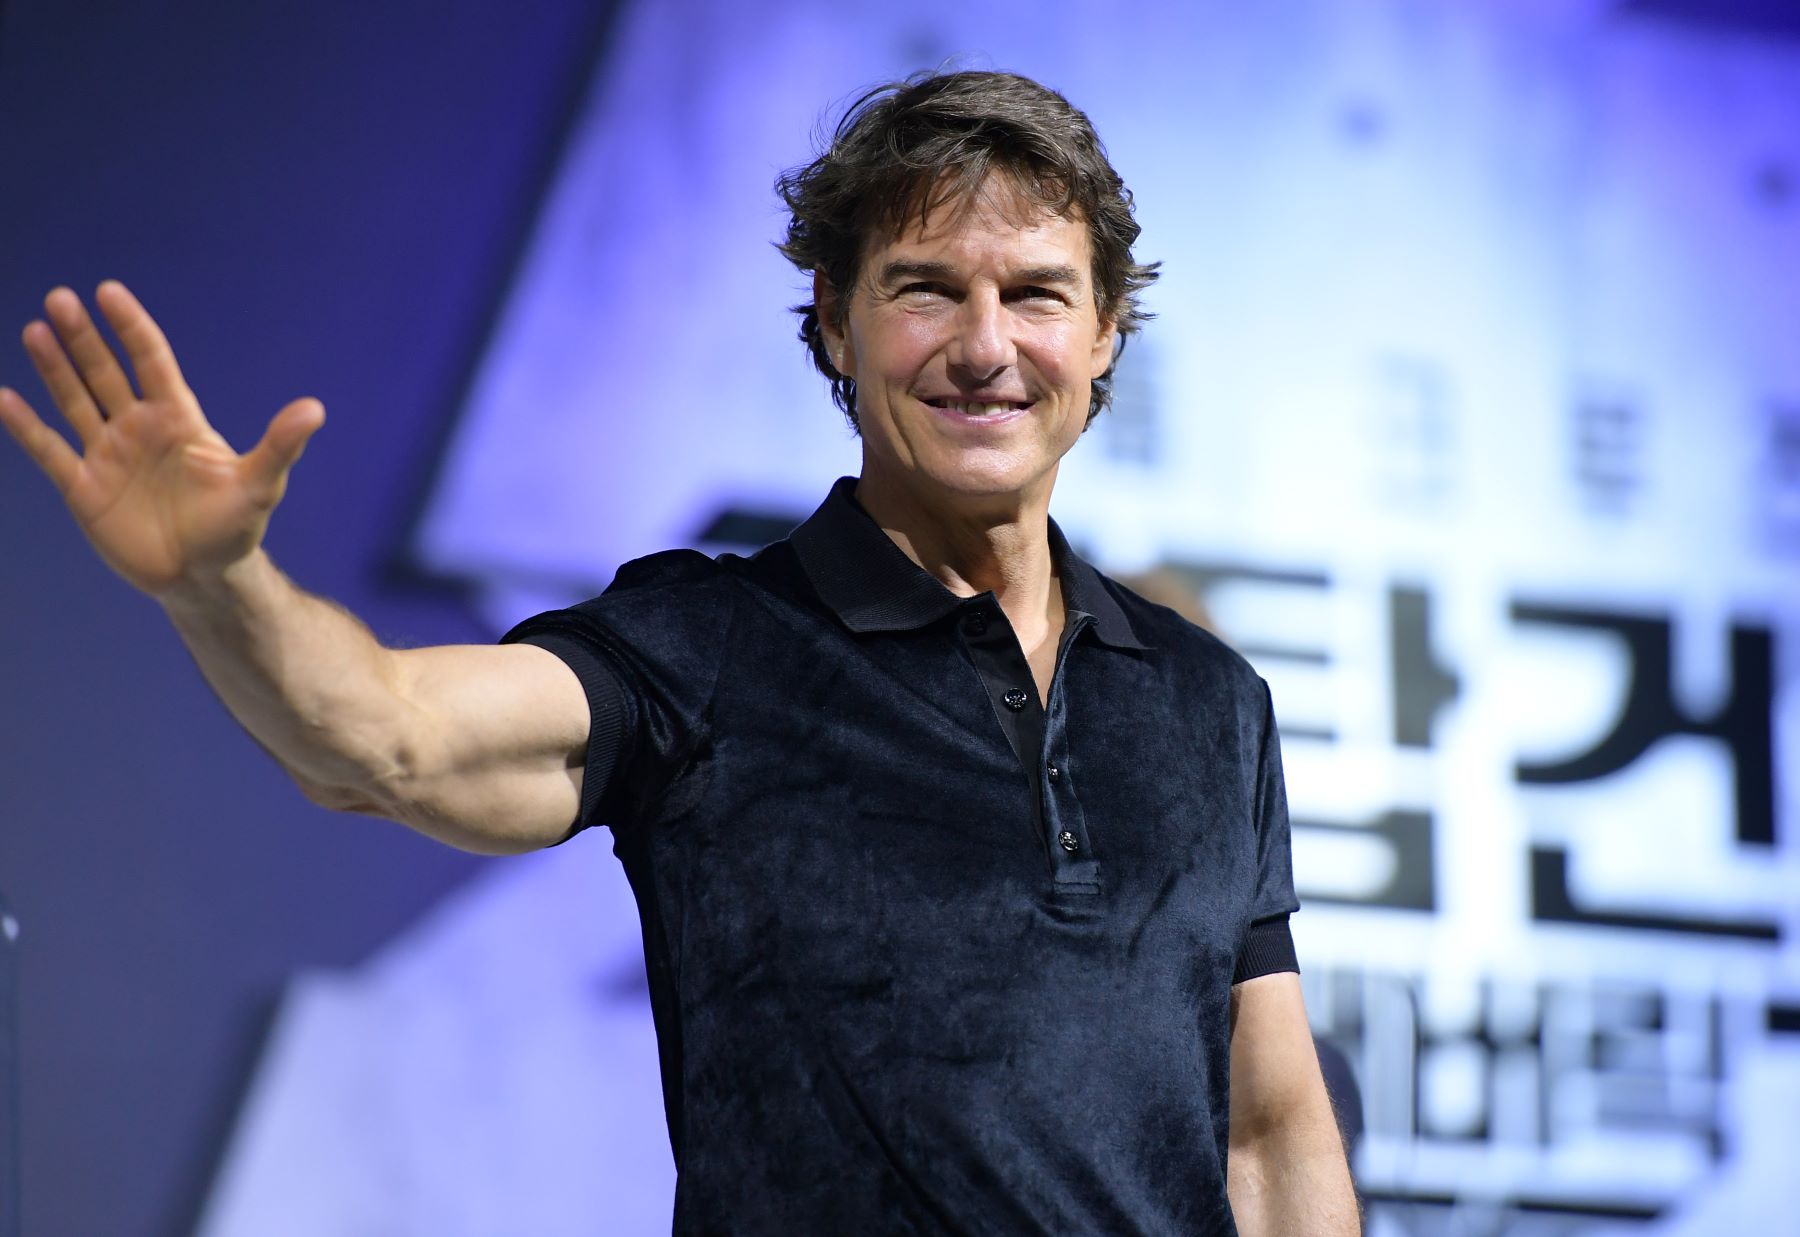 Tom Cruise attending a 'Top Gun: Maverick' press conference at Lotte Hotel World in Seoul, South Korea